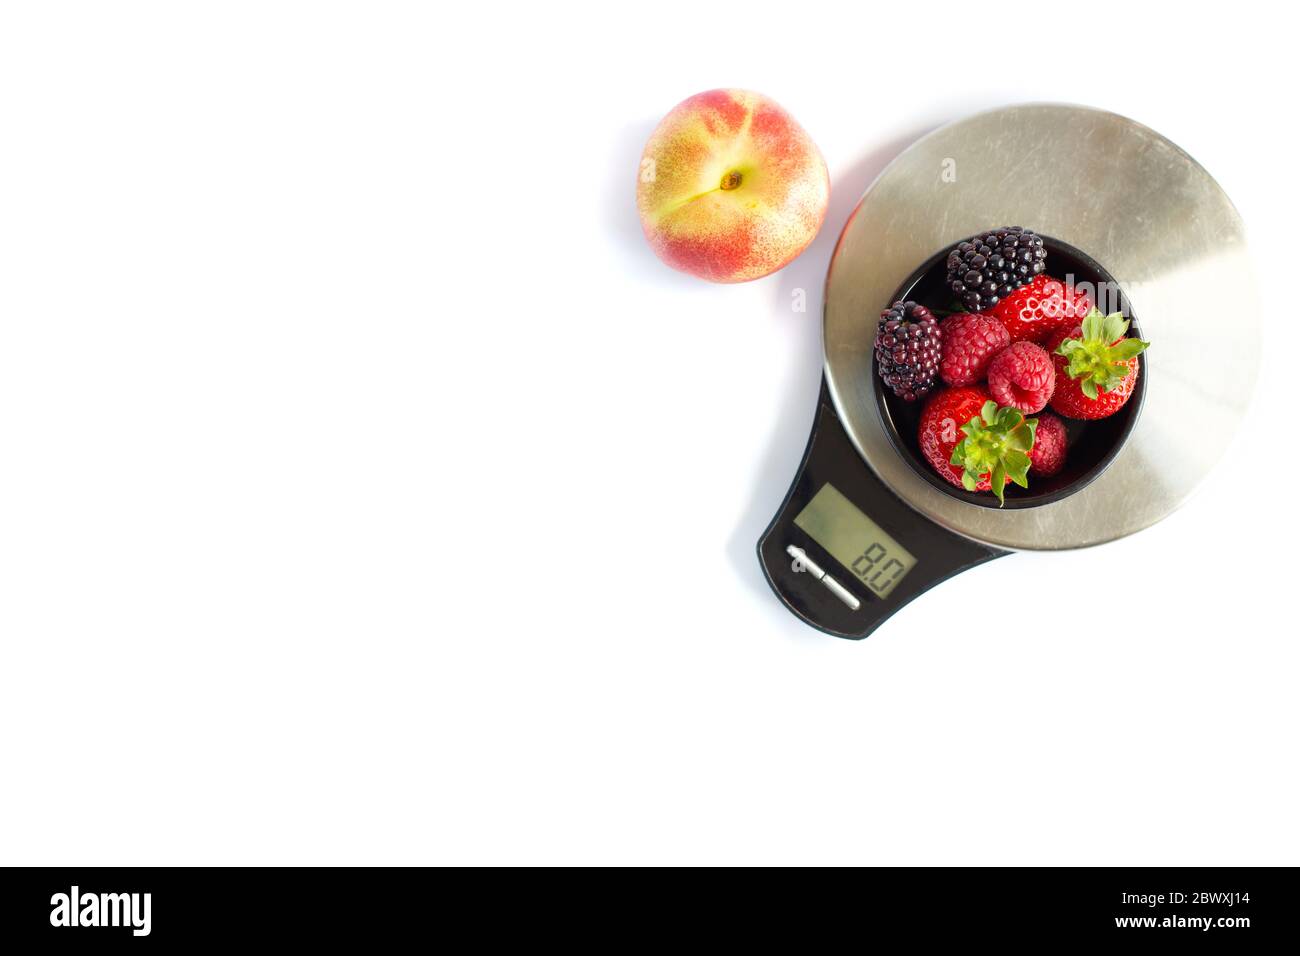 Black round plate with red black summer berries, apple and digital scale weight. Self weight control, diet, vegetarian concept Stock Photo